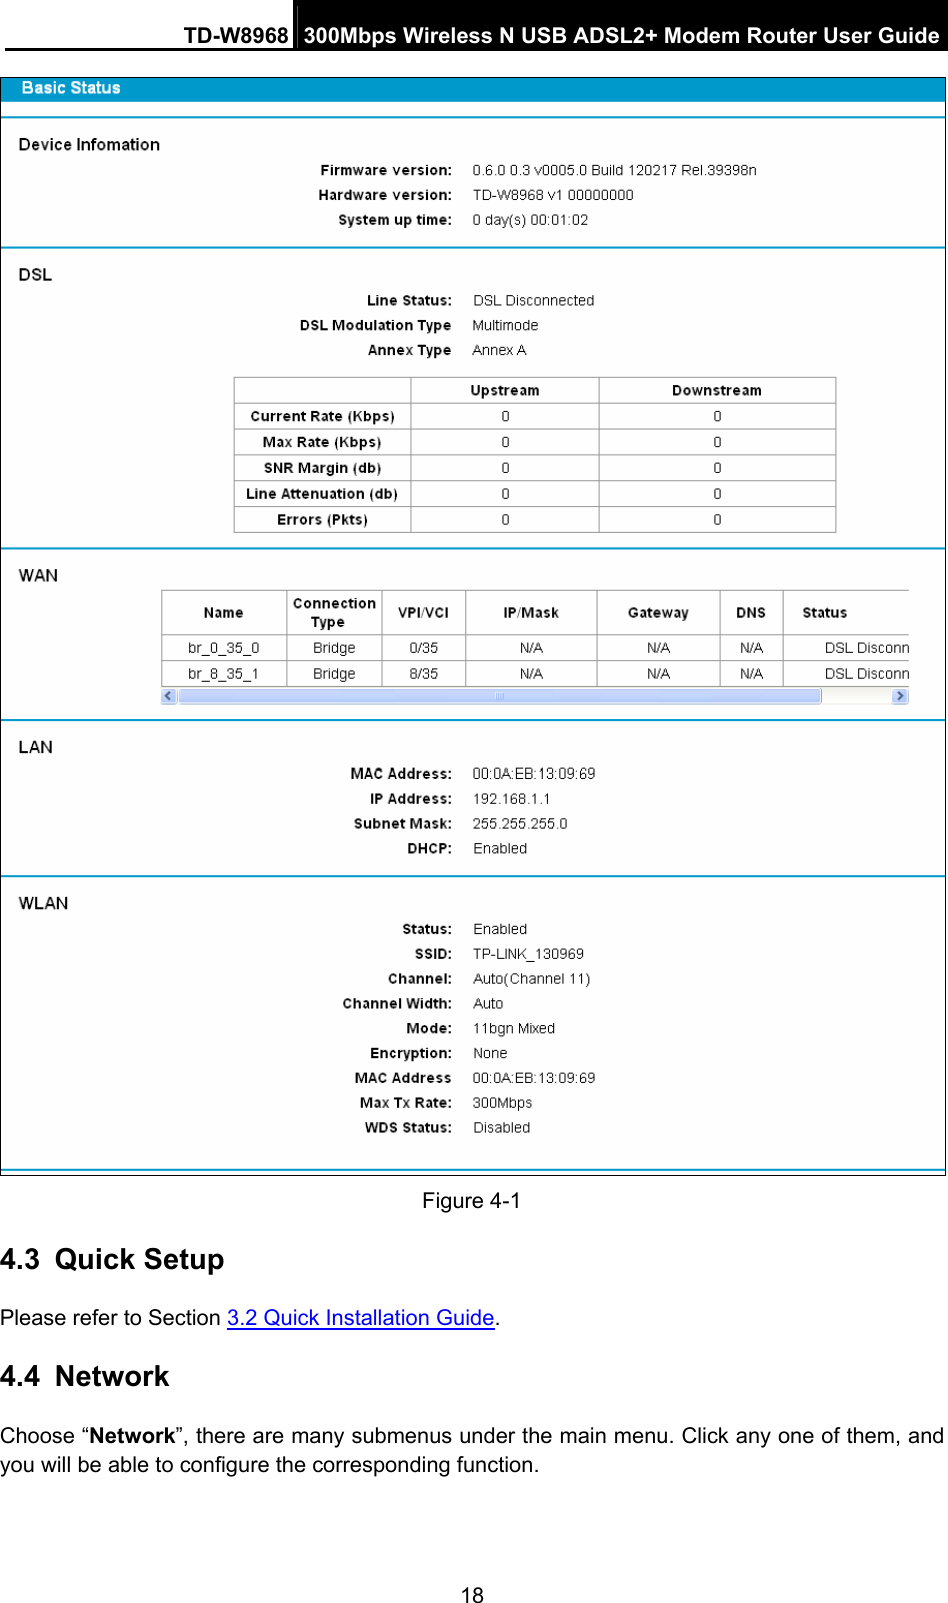 TD-W8968  300Mbps Wireless N USB ADSL2+ Modem Router User Guide 18  Figure 4-1 4.3  Quick Setup Please refer to Section 3.2 Quick Installation Guide. 4.4  Network Choose “Network”, there are many submenus under the main menu. Click any one of them, and you will be able to configure the corresponding function. 